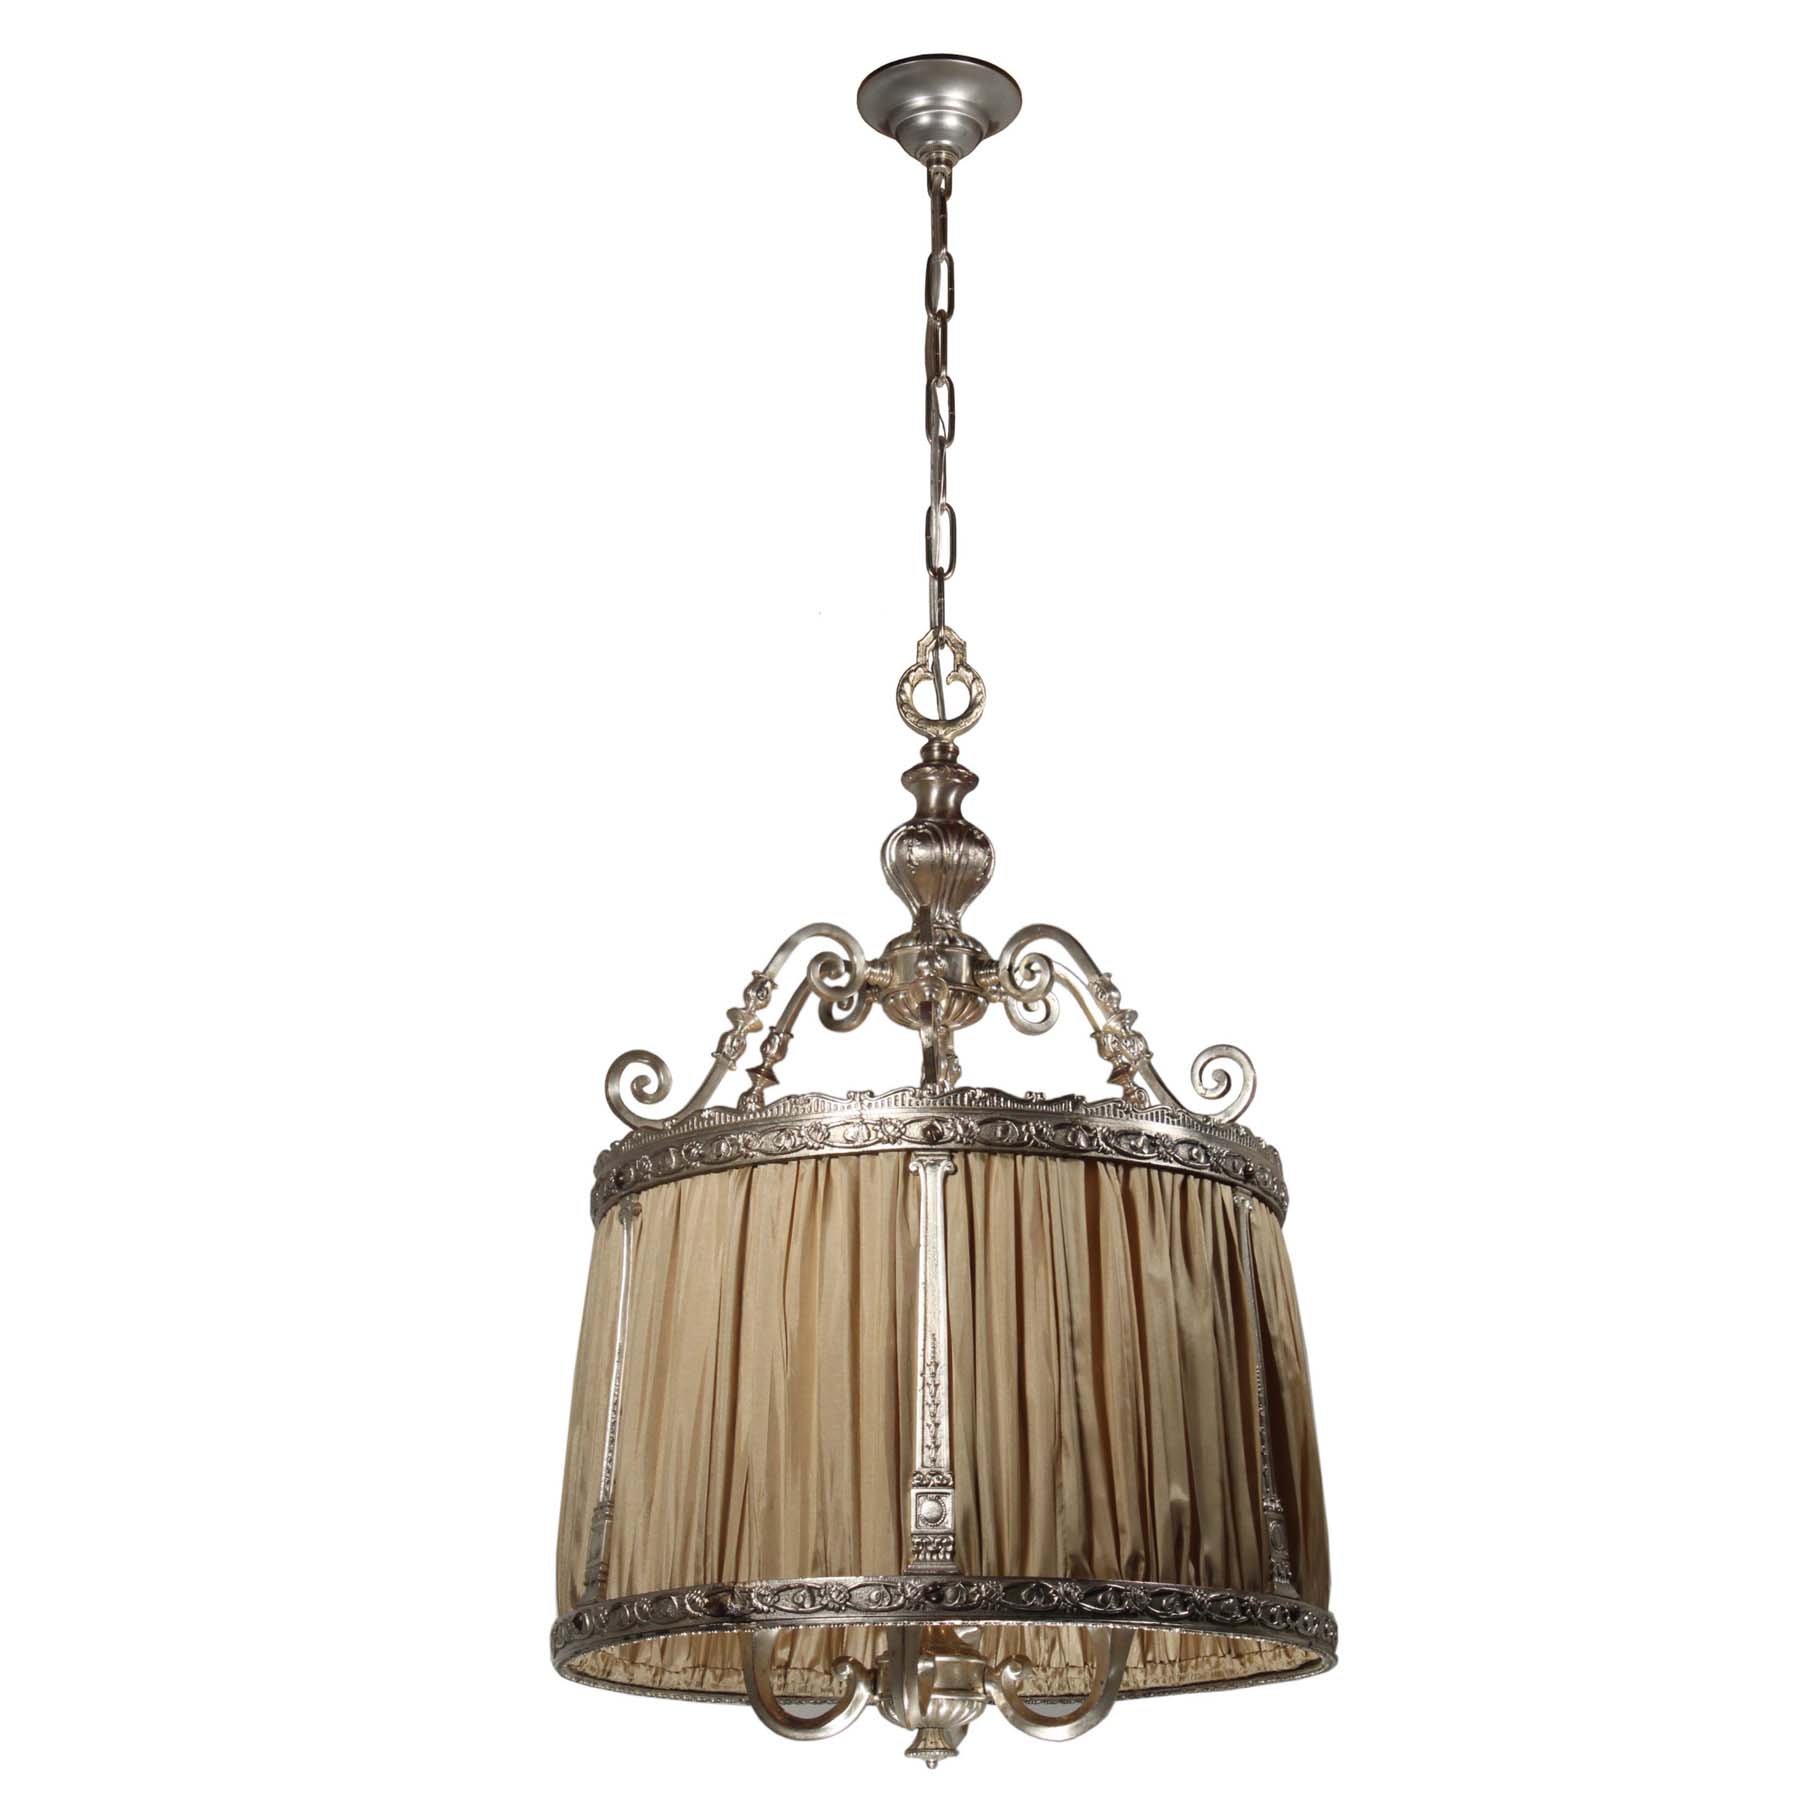 SOLD Antique Neoclassical Pendant Light, Silver Plate-67860